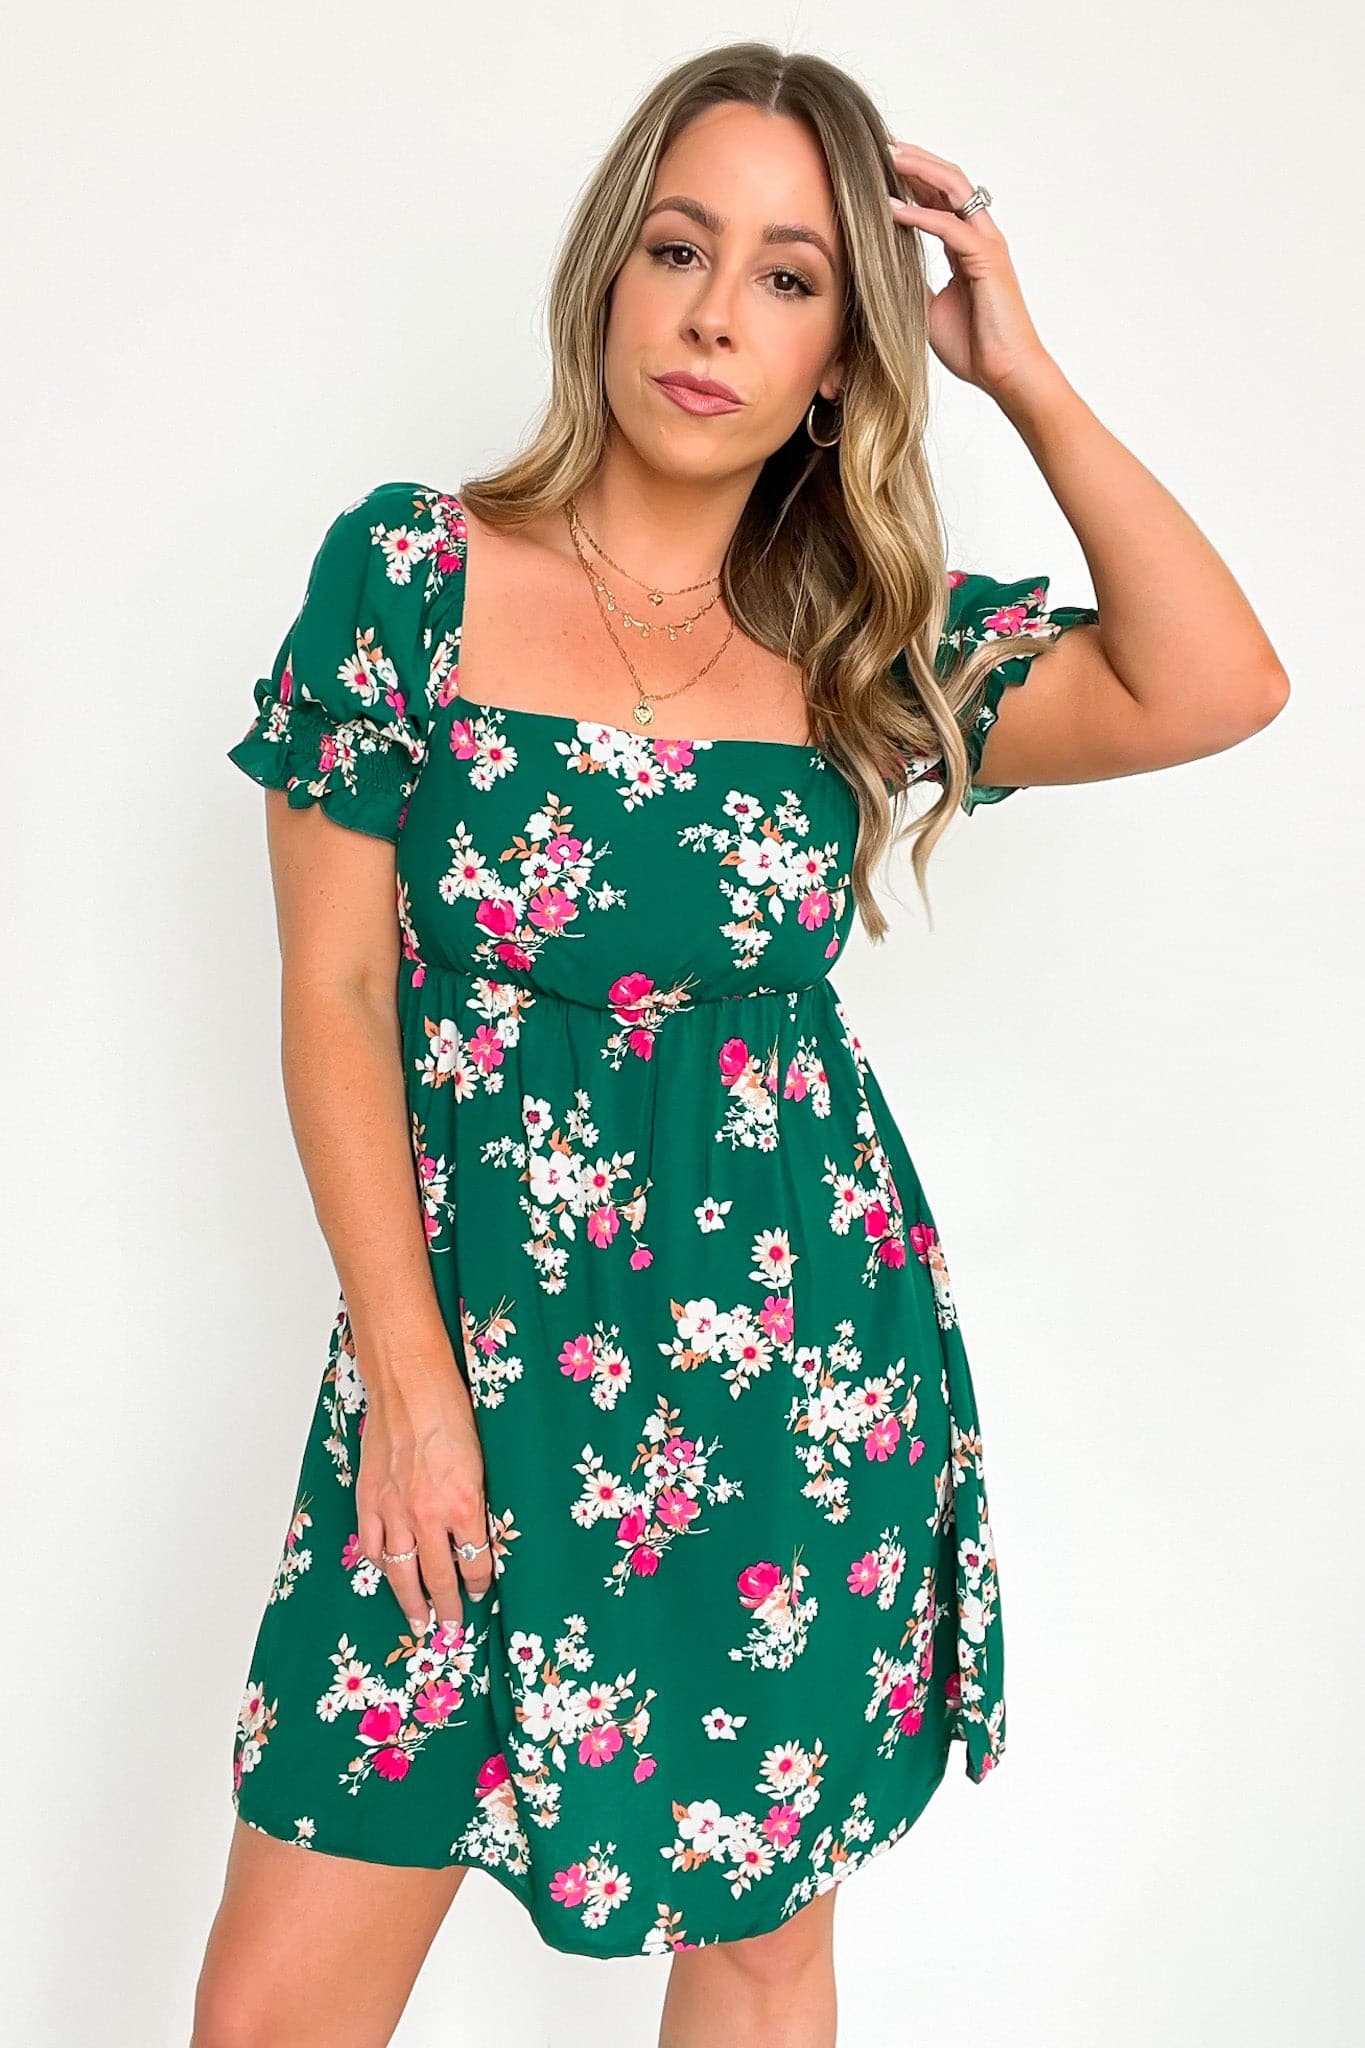  Like a Song Smocked Floral Tunic Dress - FINAL SALE - Madison and Mallory